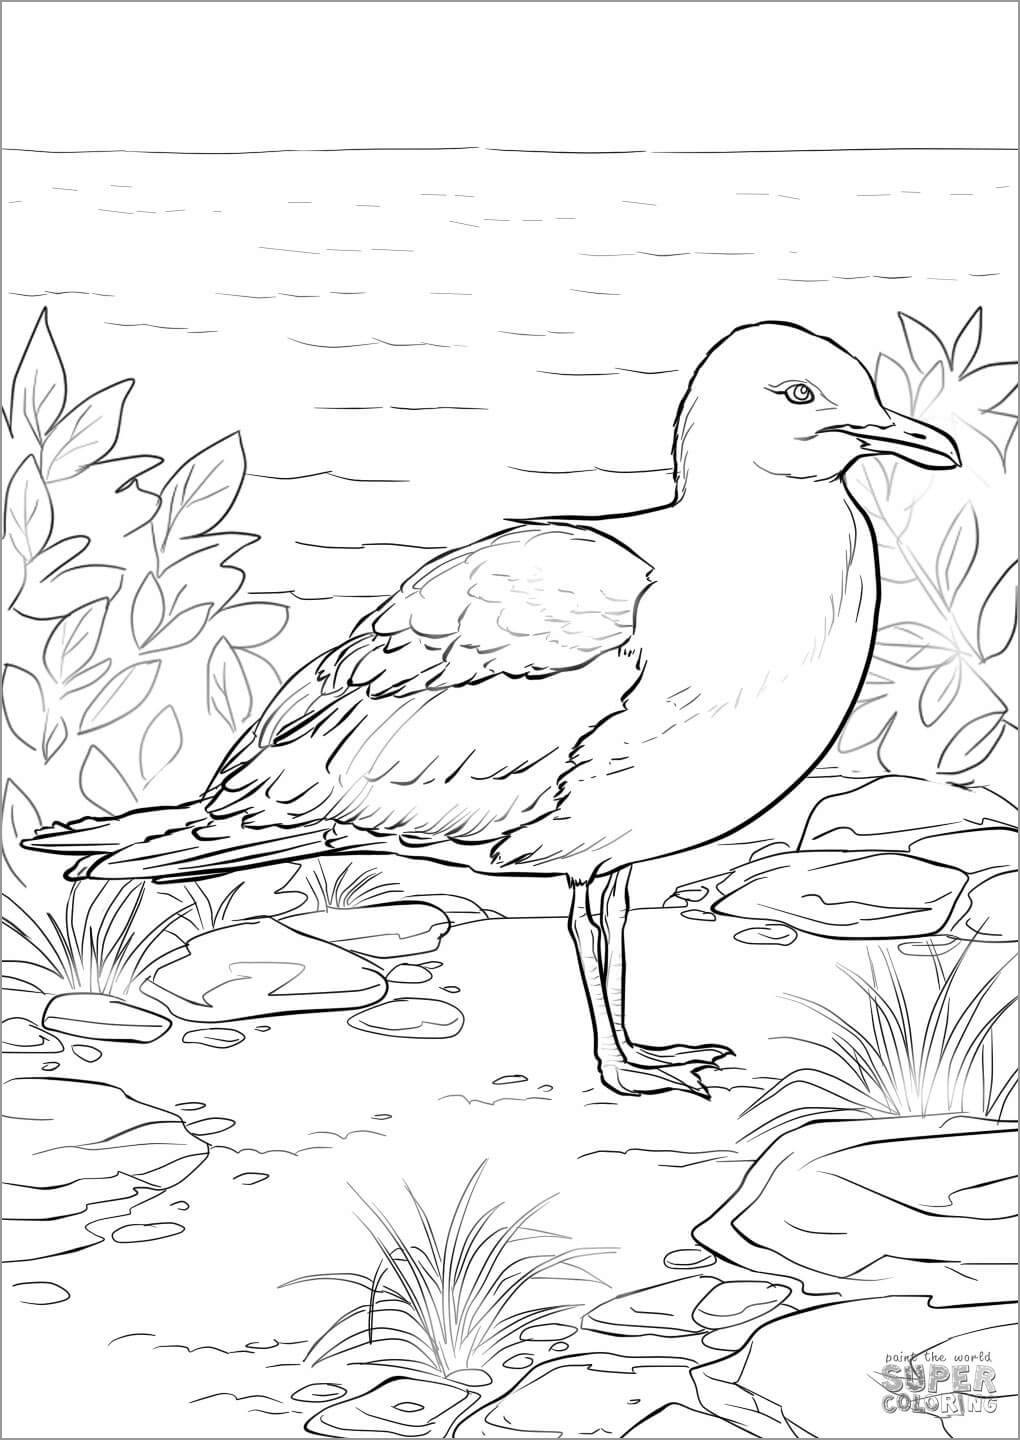 California Seagulls Coloring Page